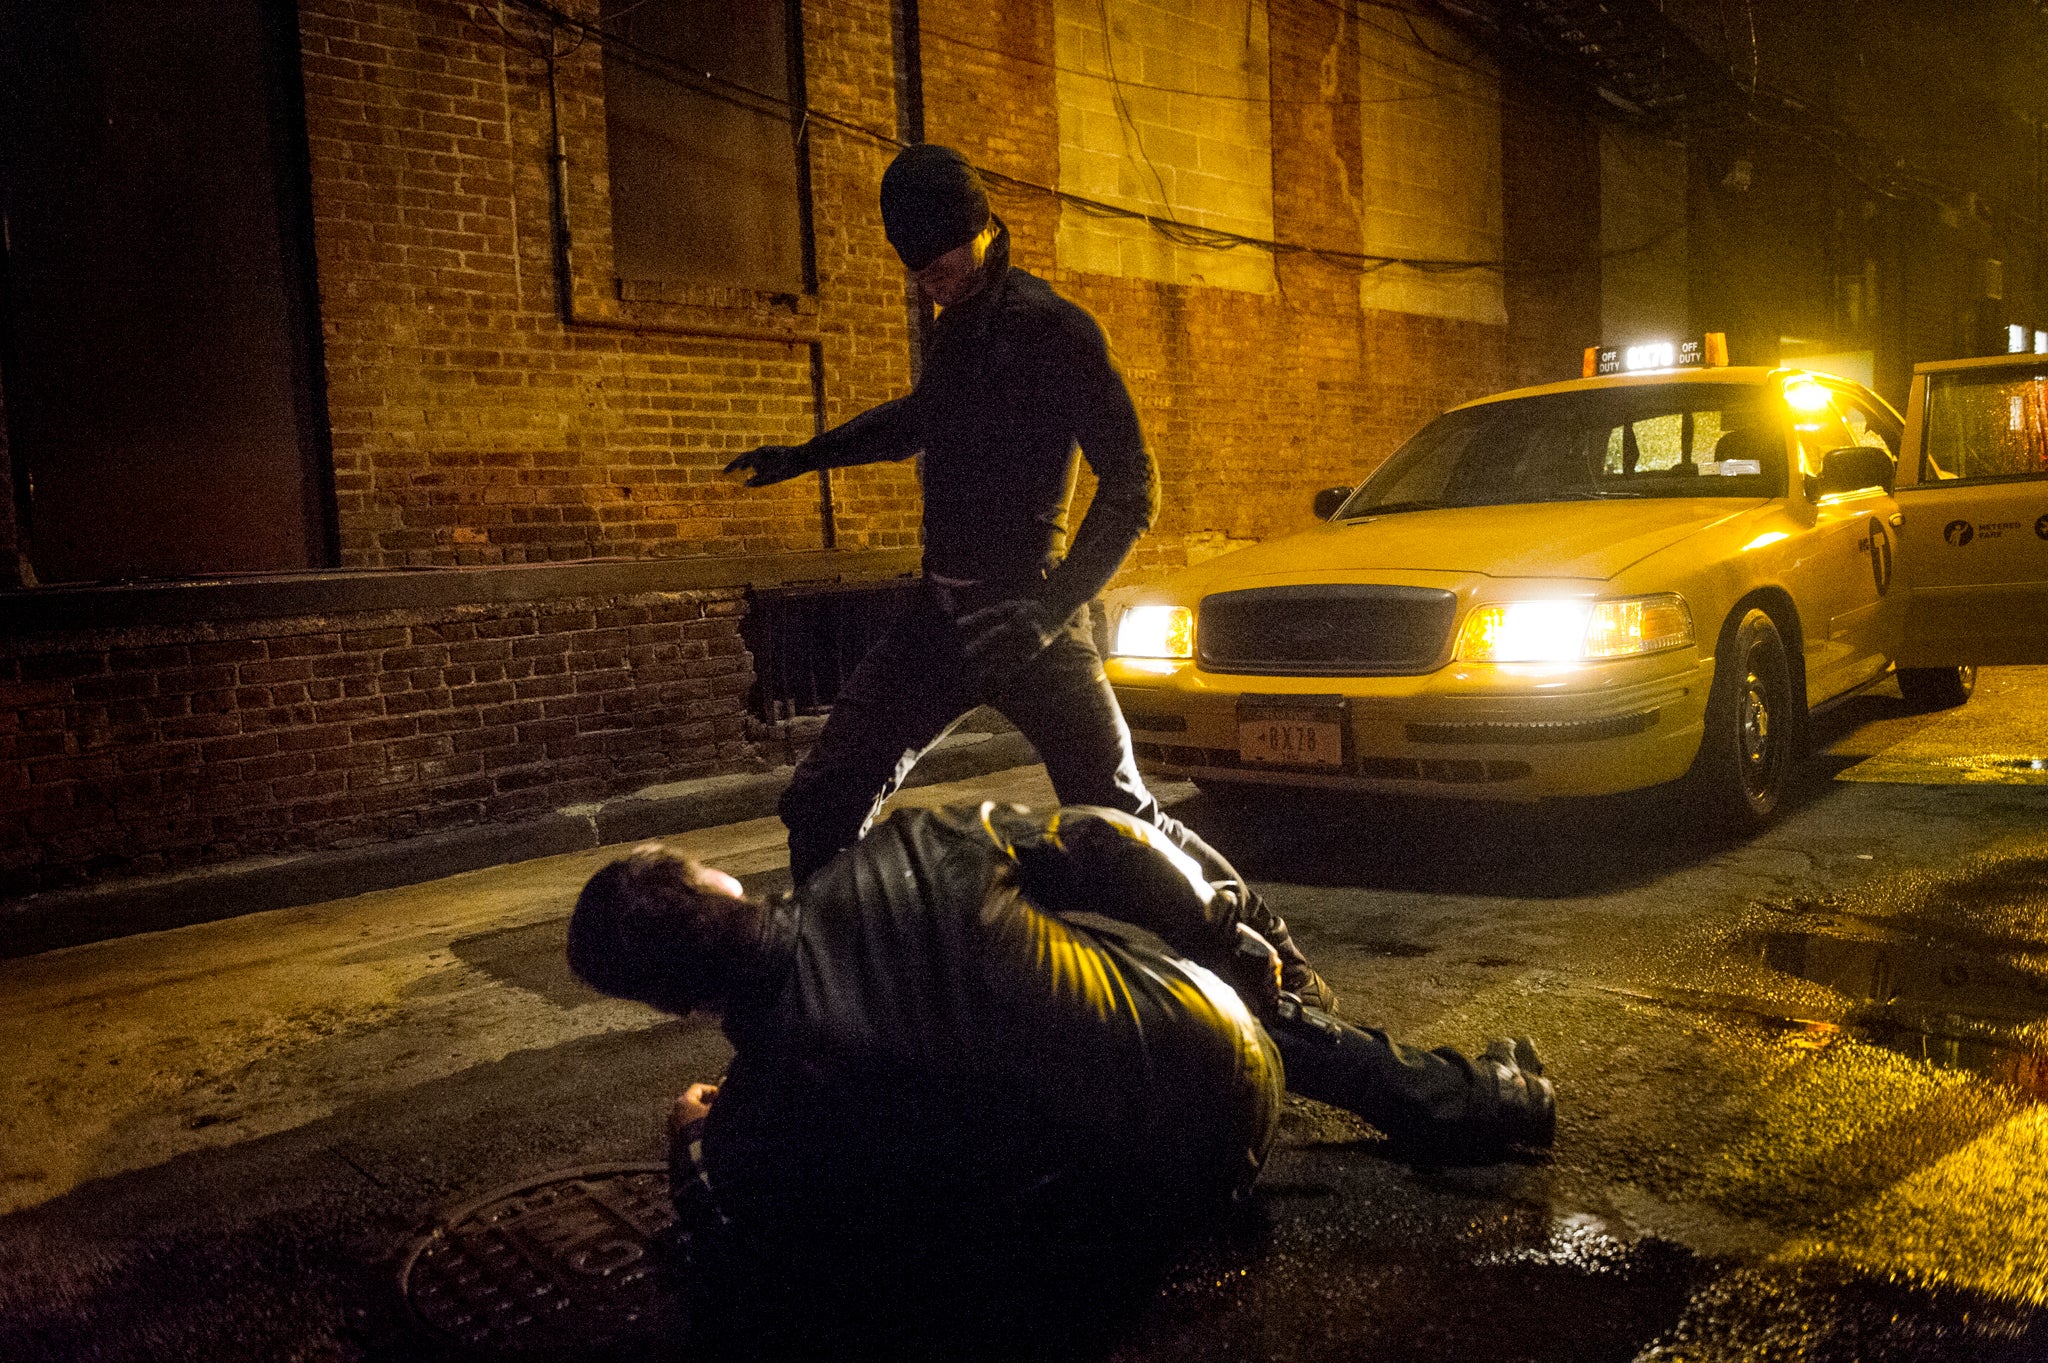 Marvel's Daredevil premiered on Netflix earlier this month